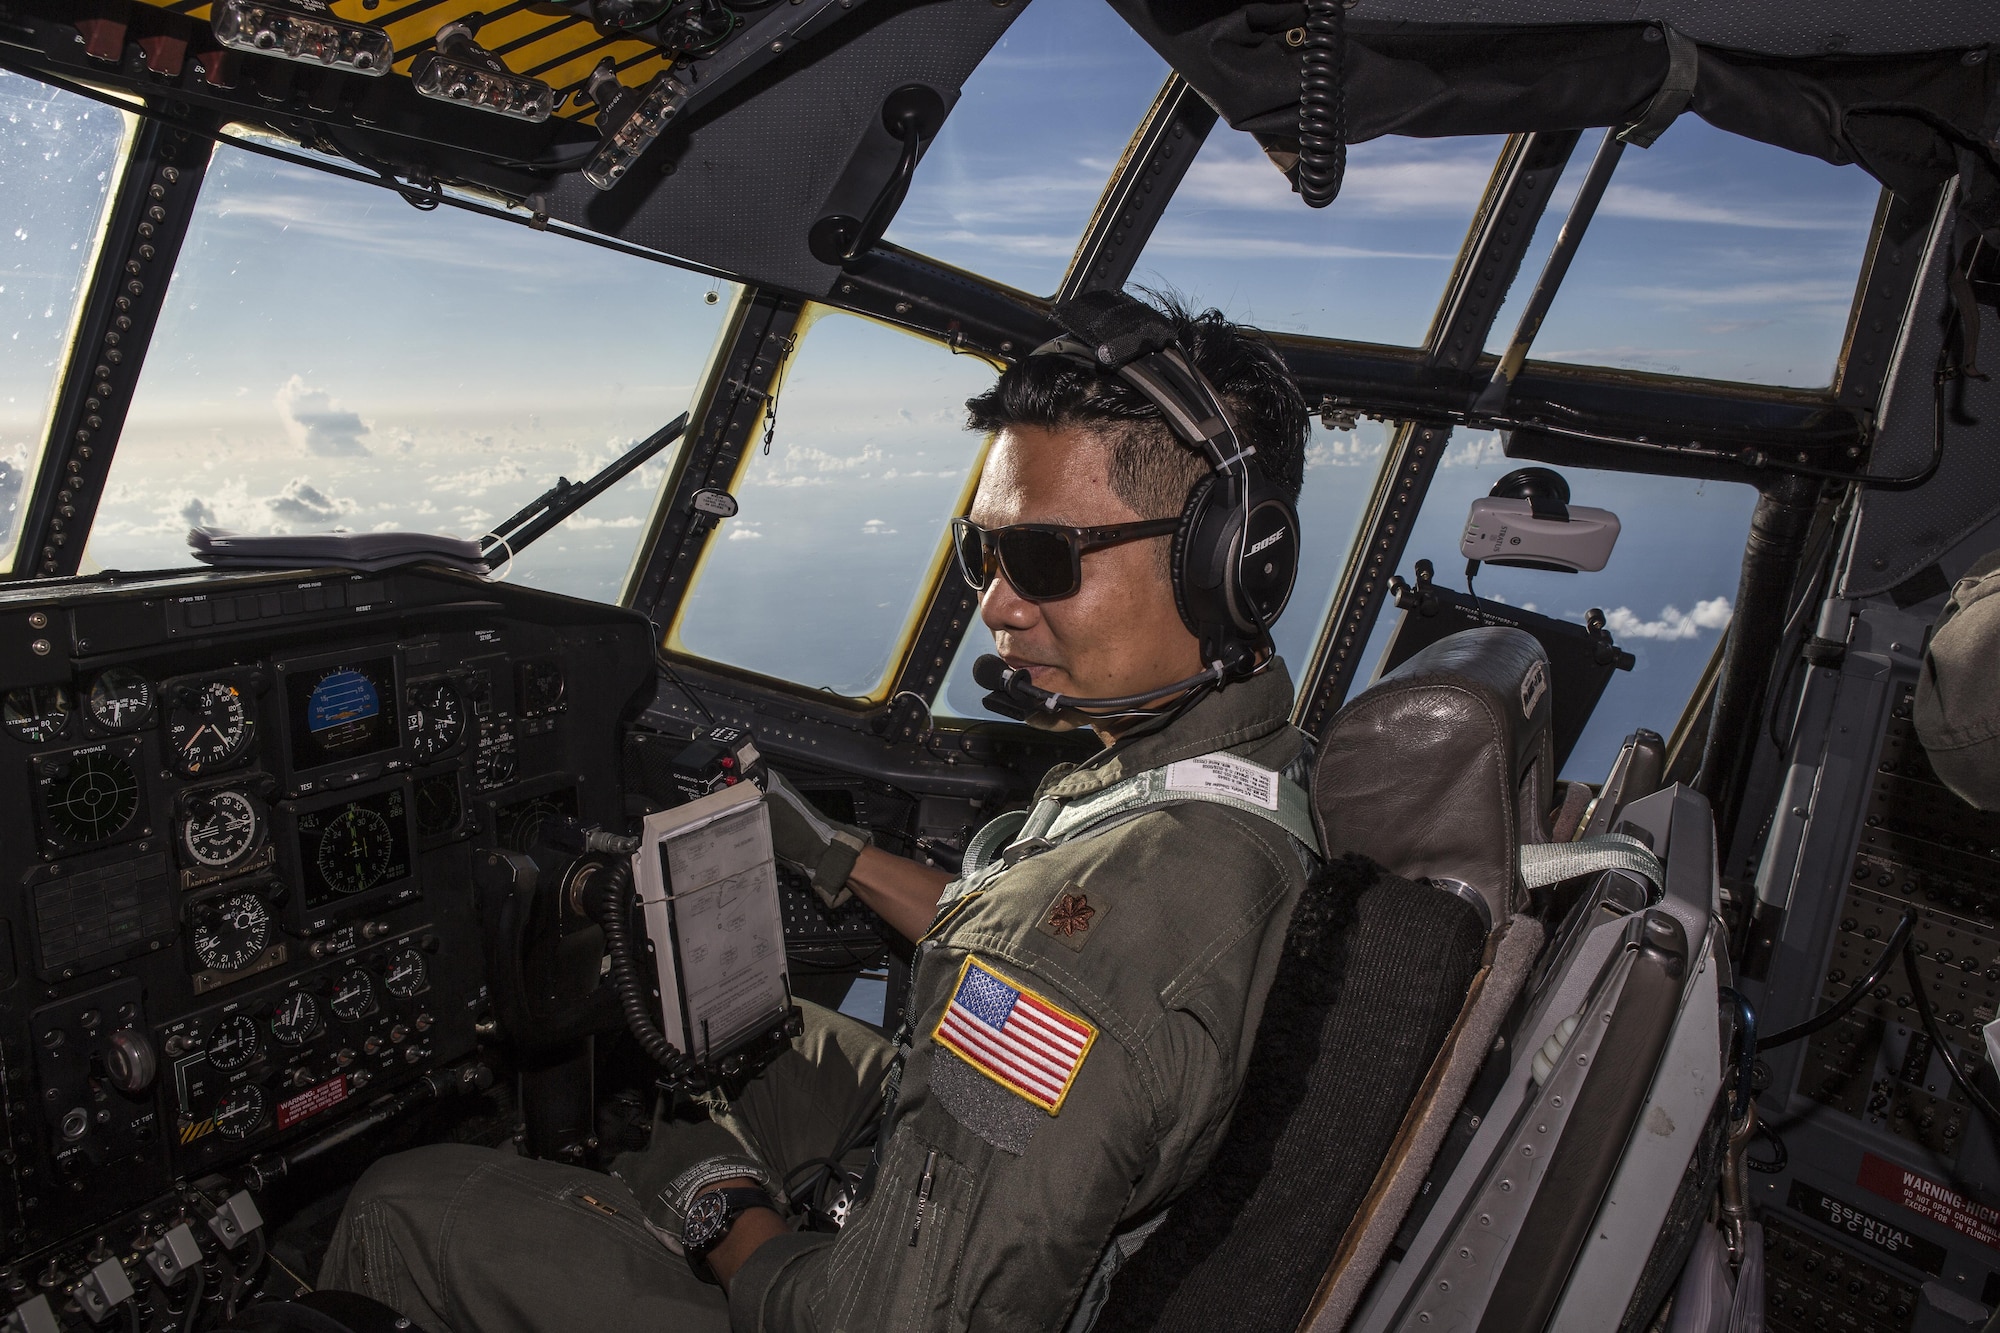 Maj. Chris Ferrara, HC-130P/N "King" co-pilot, is part of  concerted rescue effort of approximately 80 wing personnel from the 920th Rescue Wing who rescued two German citizens in distress at sea July 7, 2017 and into July 8. The victim's vessel caught fire approximately 500 nautical miles off the east coast of southern Florida. At the request of the U.S. Coast Guard's Seventh District in Miami, the 920th RQW was alerted by the Air Force Rescue Coordination Center at Tyndall Air Force Base, Florida, to assist in the long-range search and rescue. Approximately 80 wing Citizen Airmen and four wing aircraft helped execute the rescue mission to include, maintenance, operations and support personnel. (U.S. Air Force photo by Master Sgt. Mark Borosch)
